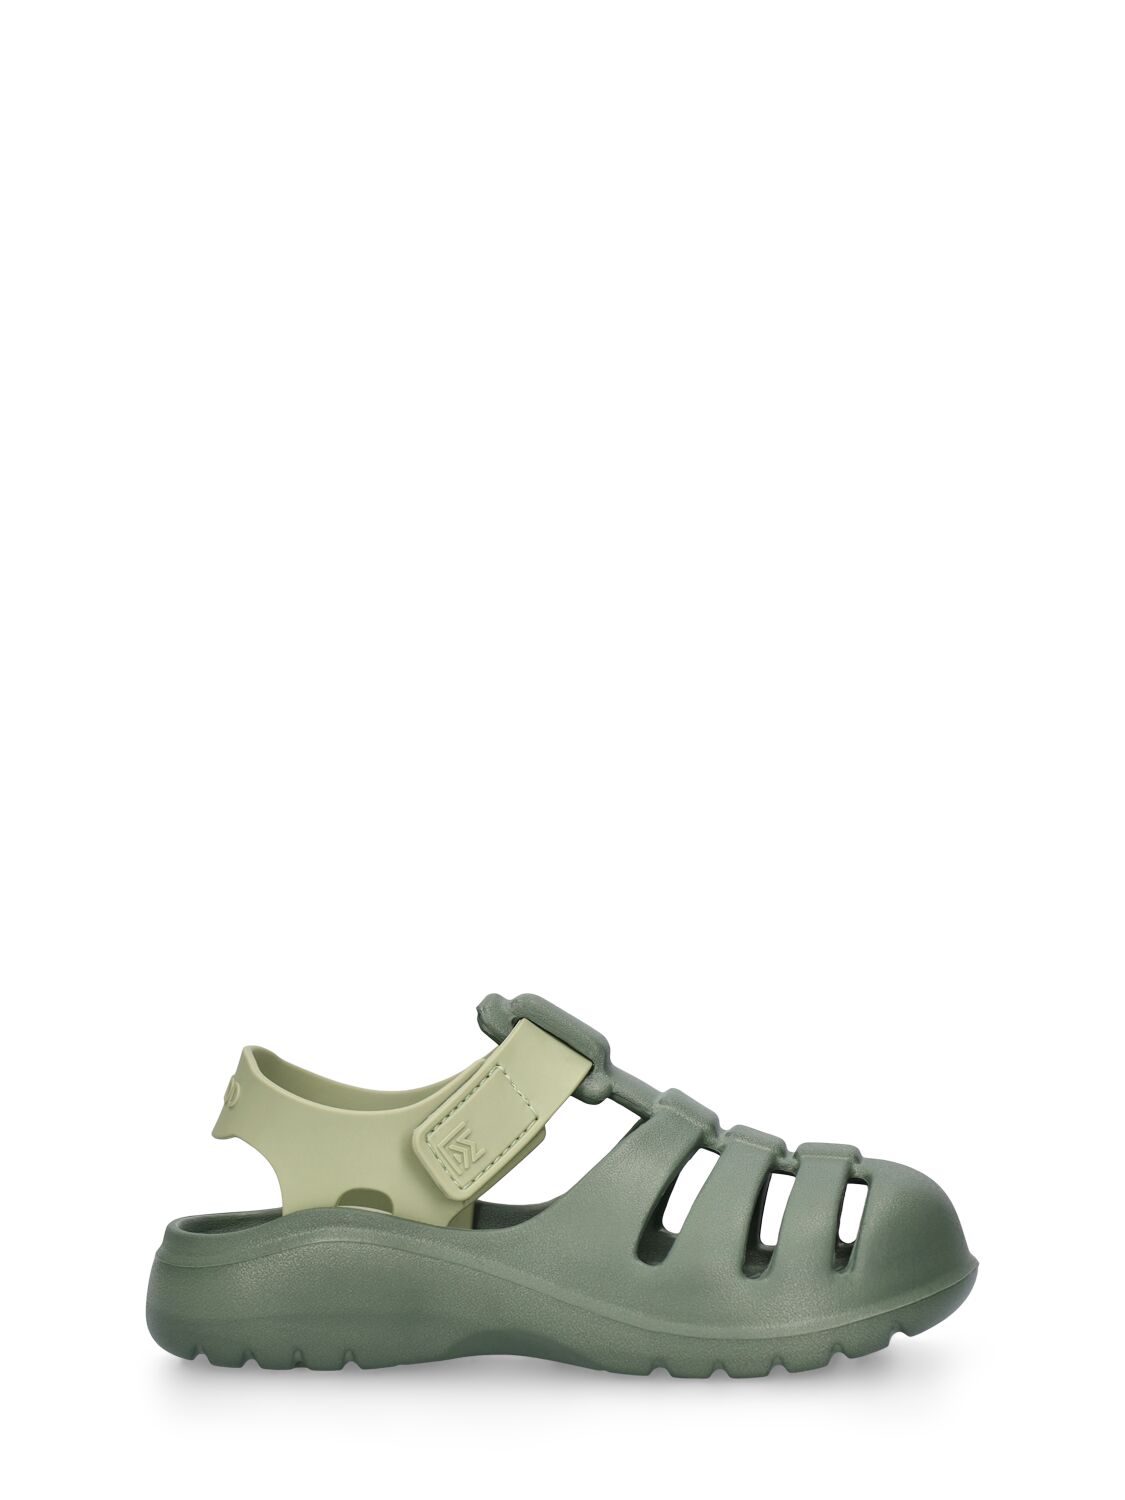 Liewood Kids' Rubber Jelly Sandals In Military Green